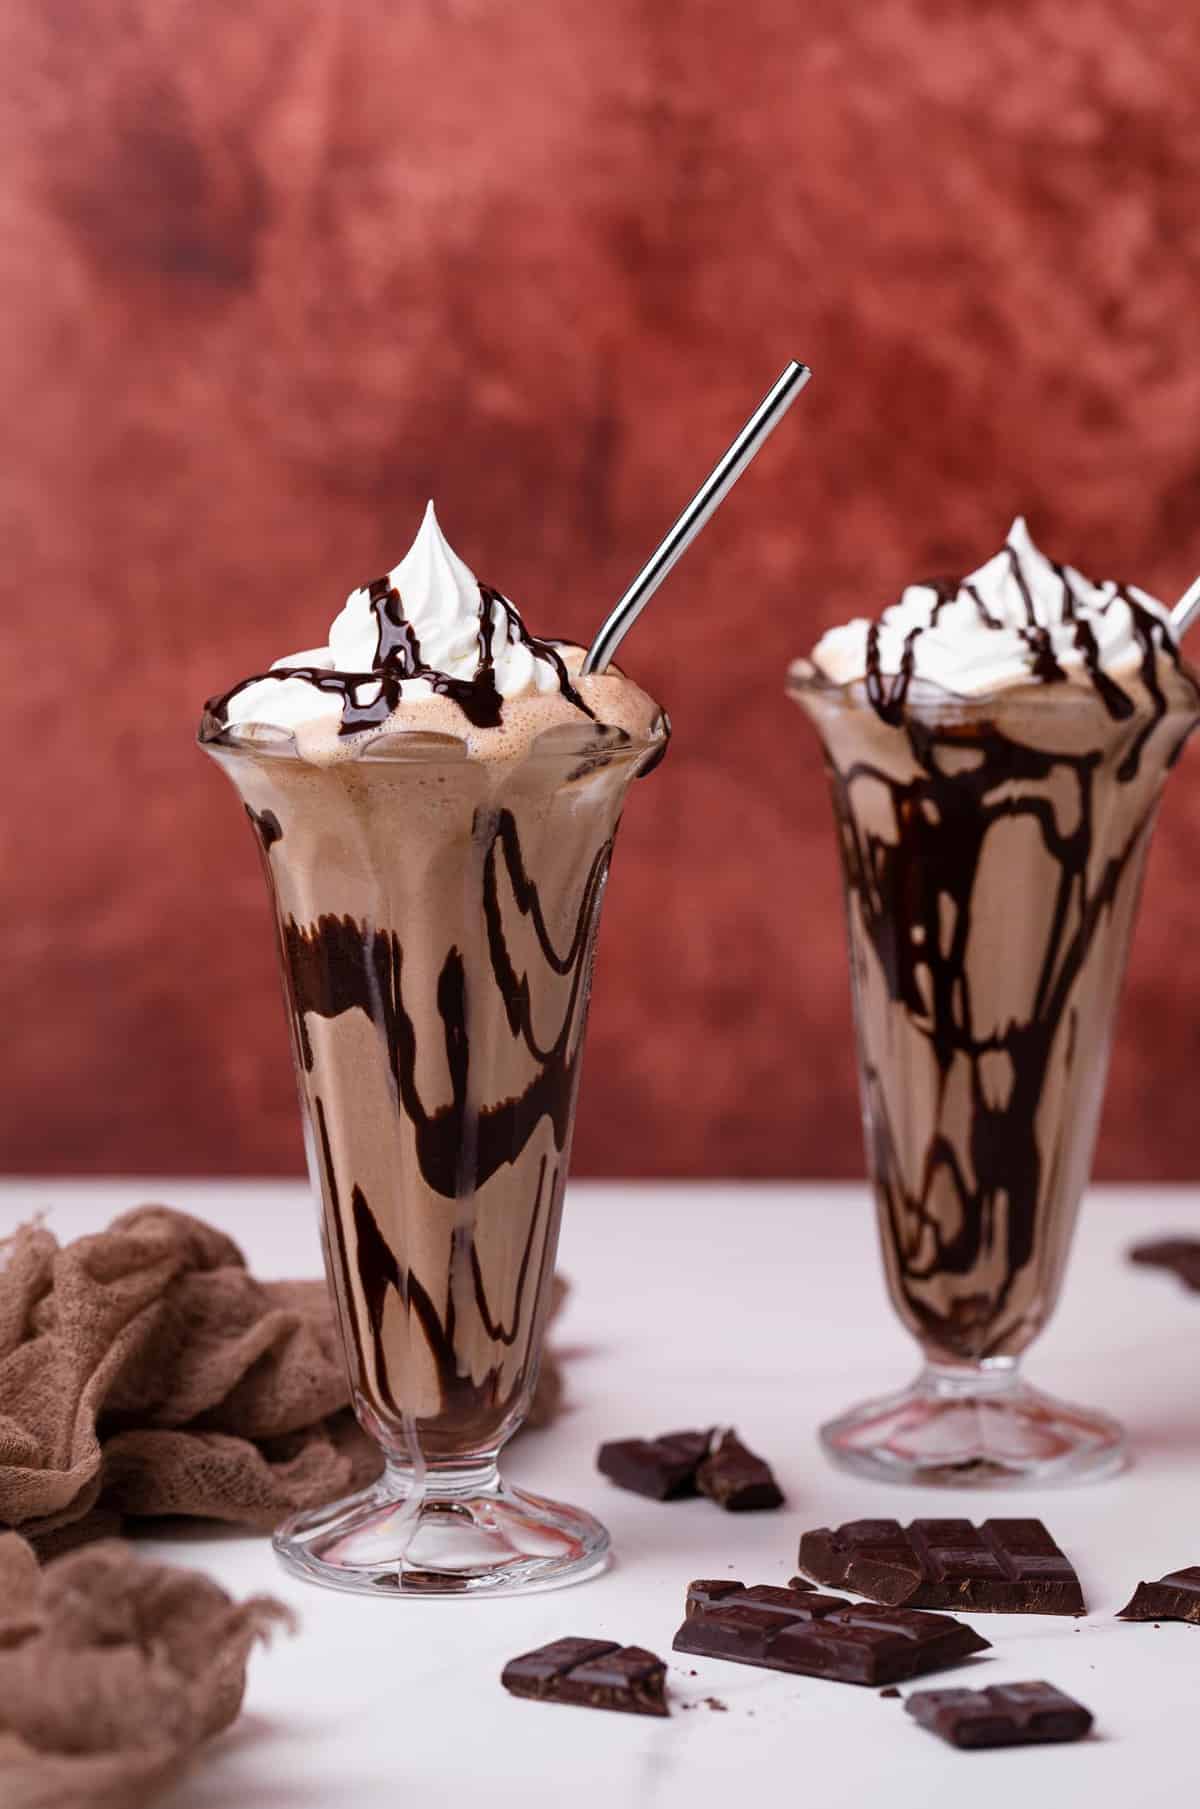 Two Dairy-Free Peanut Butter Chocolate Milkshakes in tall glasses.